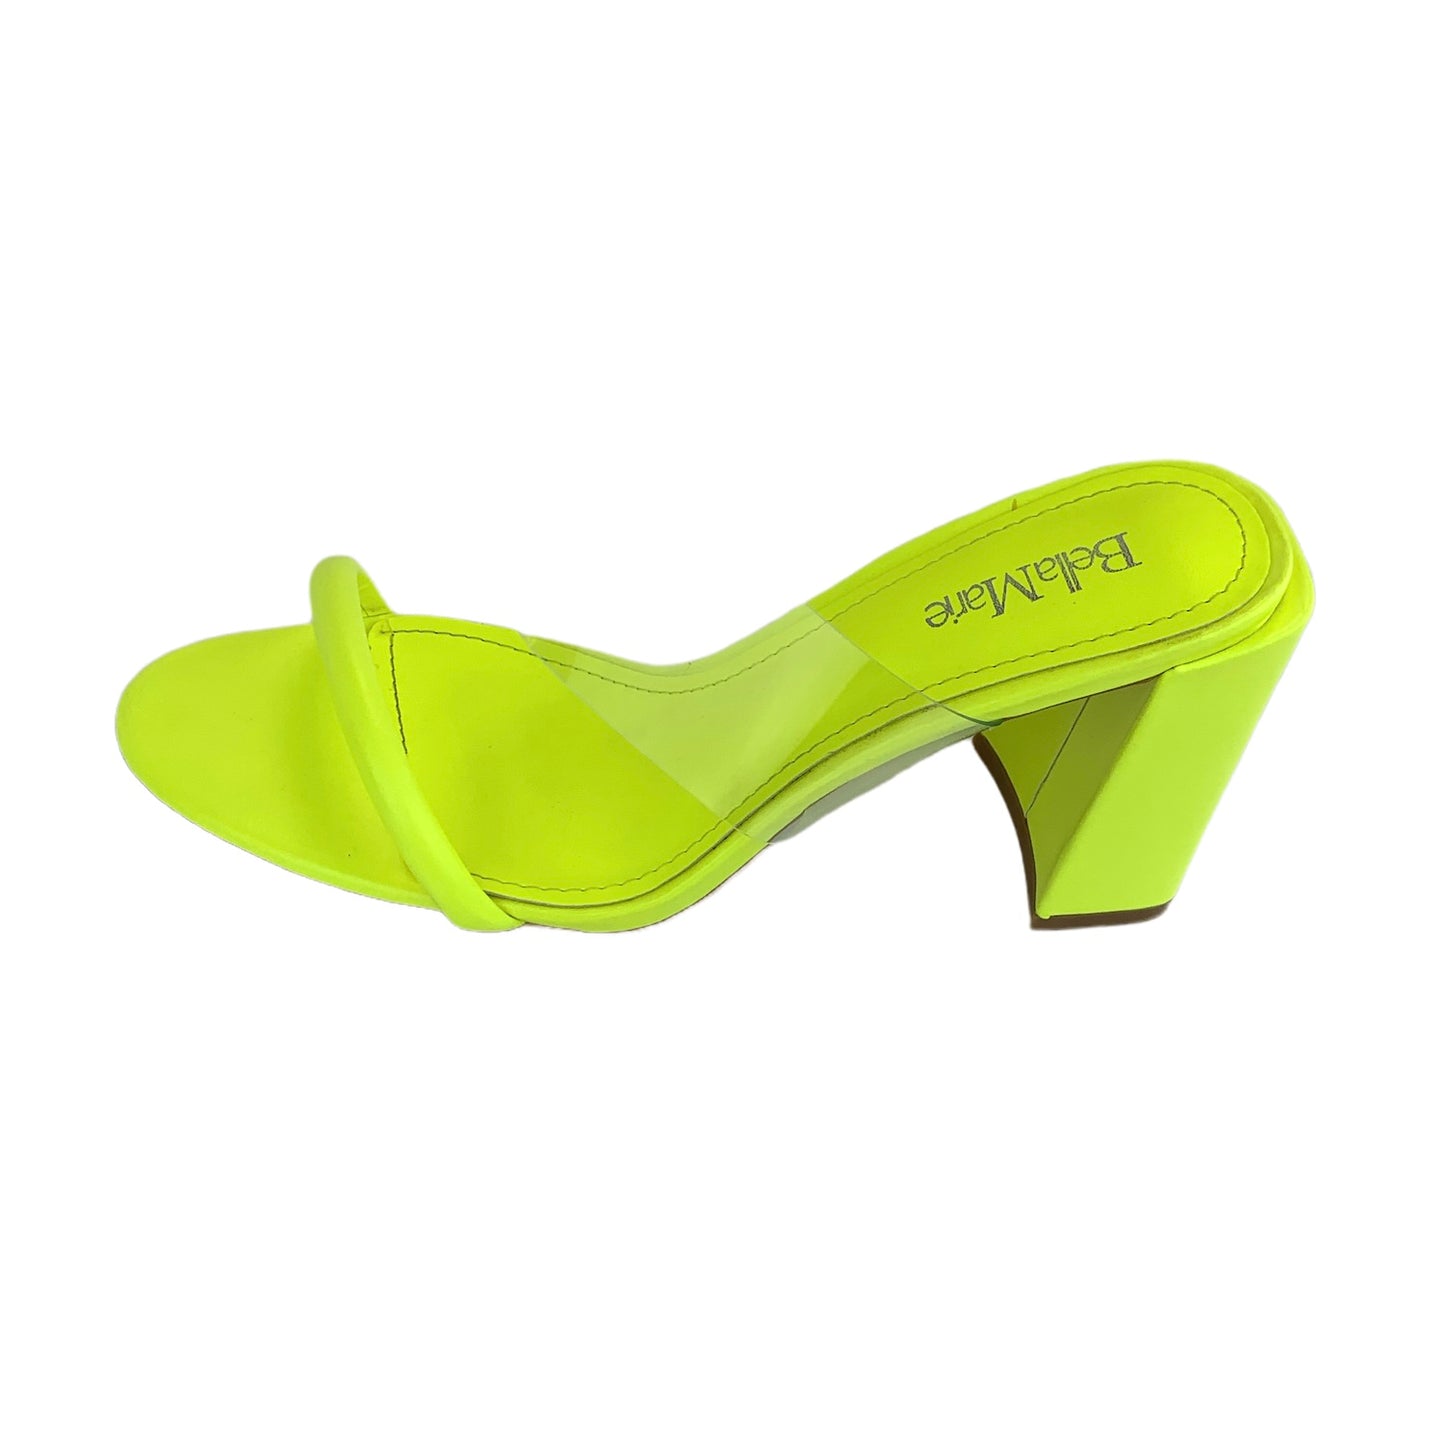 LOUNGE-1 Heeled Sandals Women's Shoes